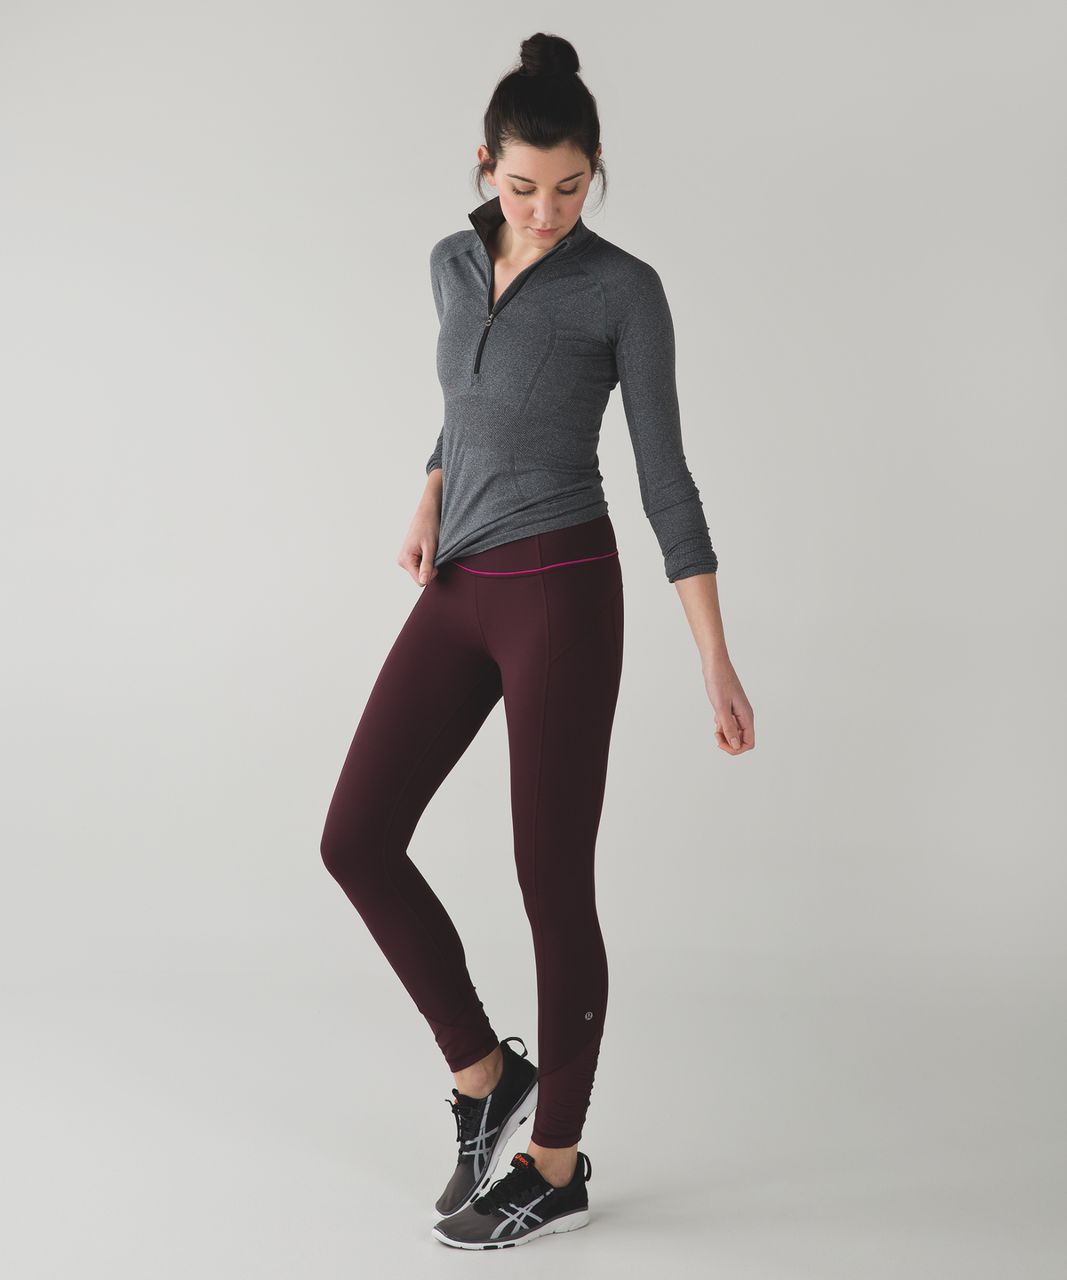 Lululemon Pace Queen Tight *Full-On Luxtreme - Bordeaux Drama / Raspberry